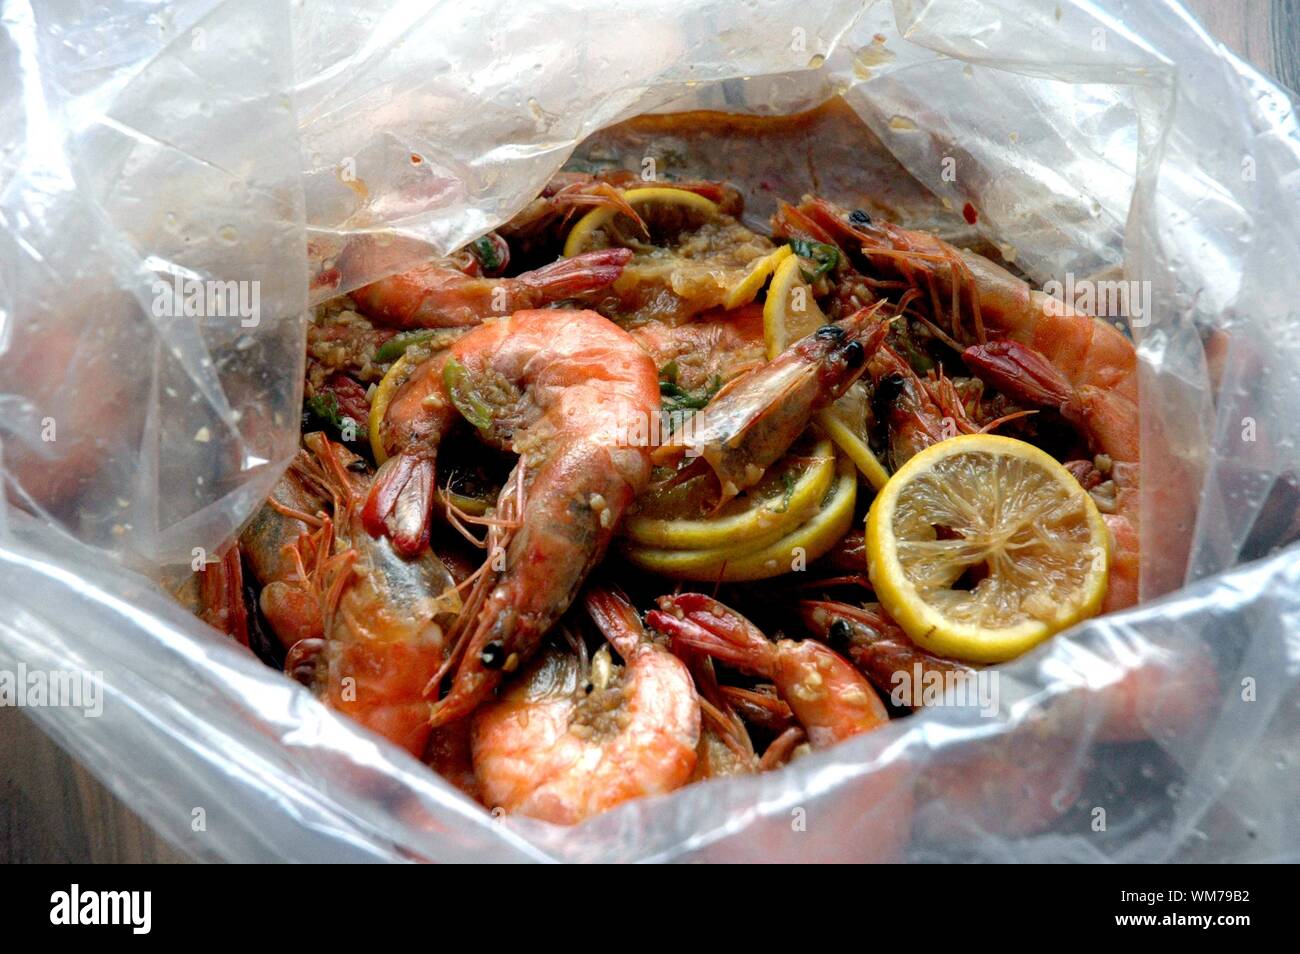 Download Shrimp In Plastic Bag High Resolution Stock Photography And Images Alamy Yellowimages Mockups